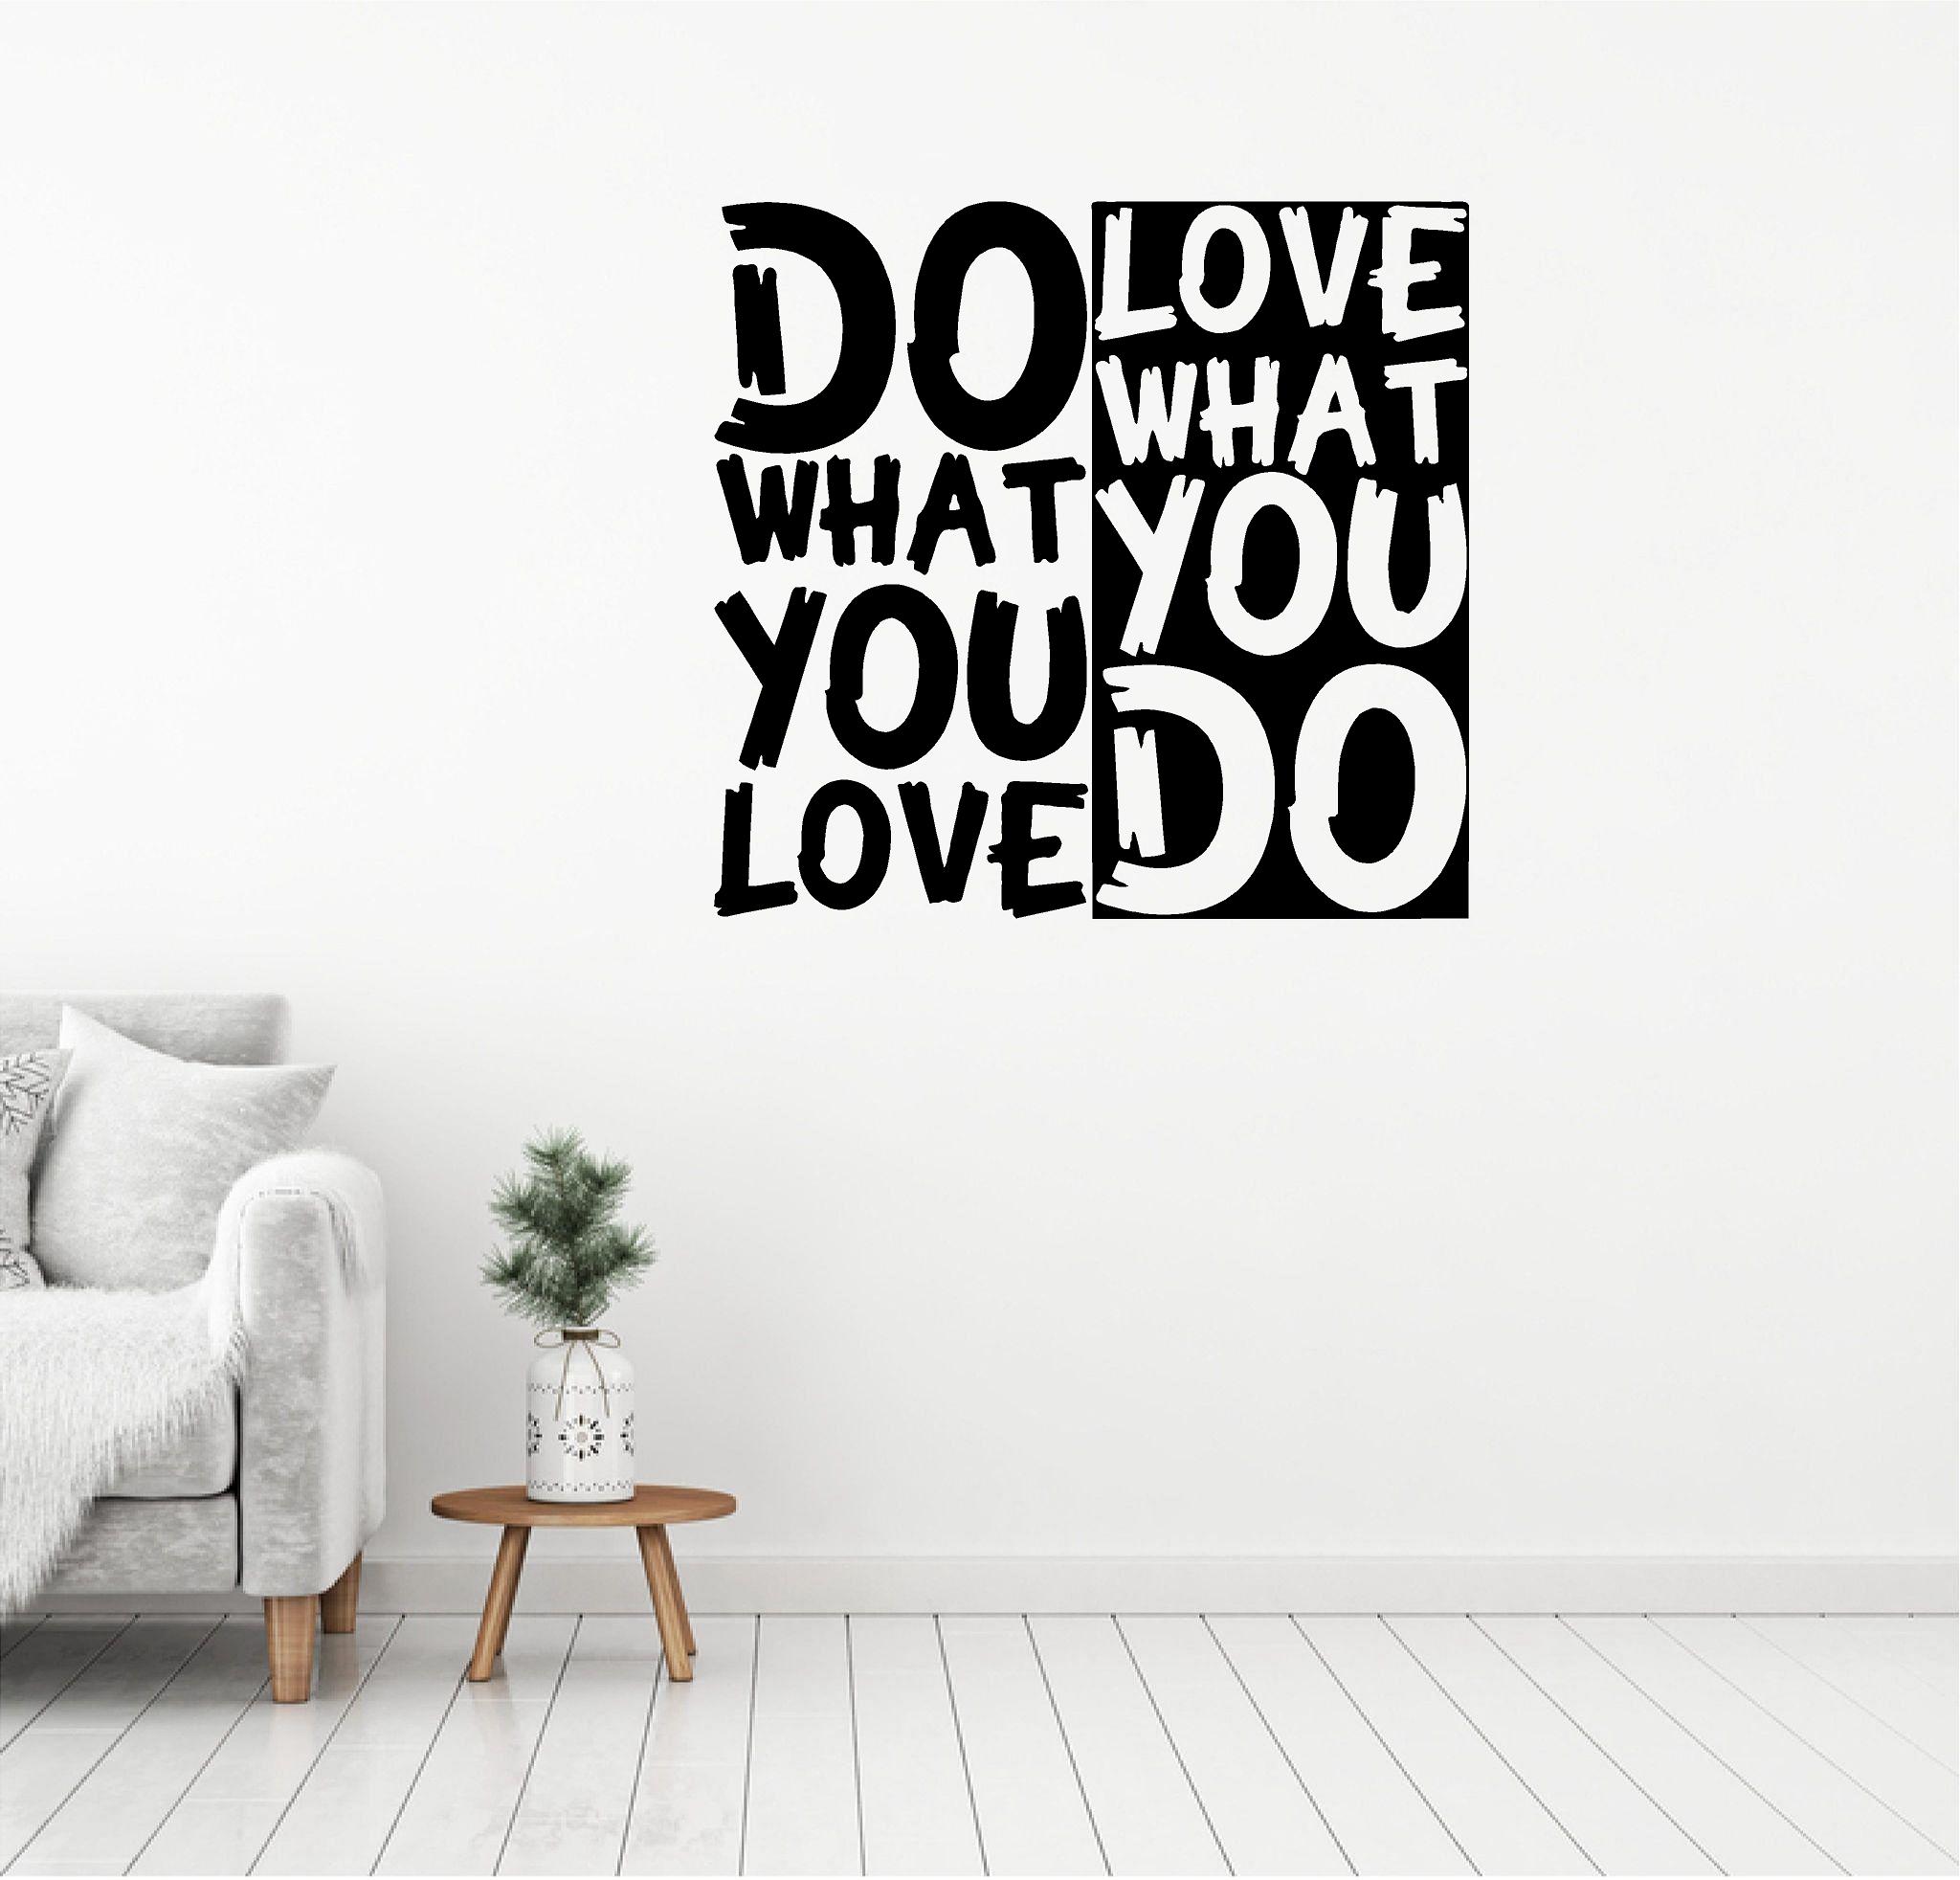 Love what you do.